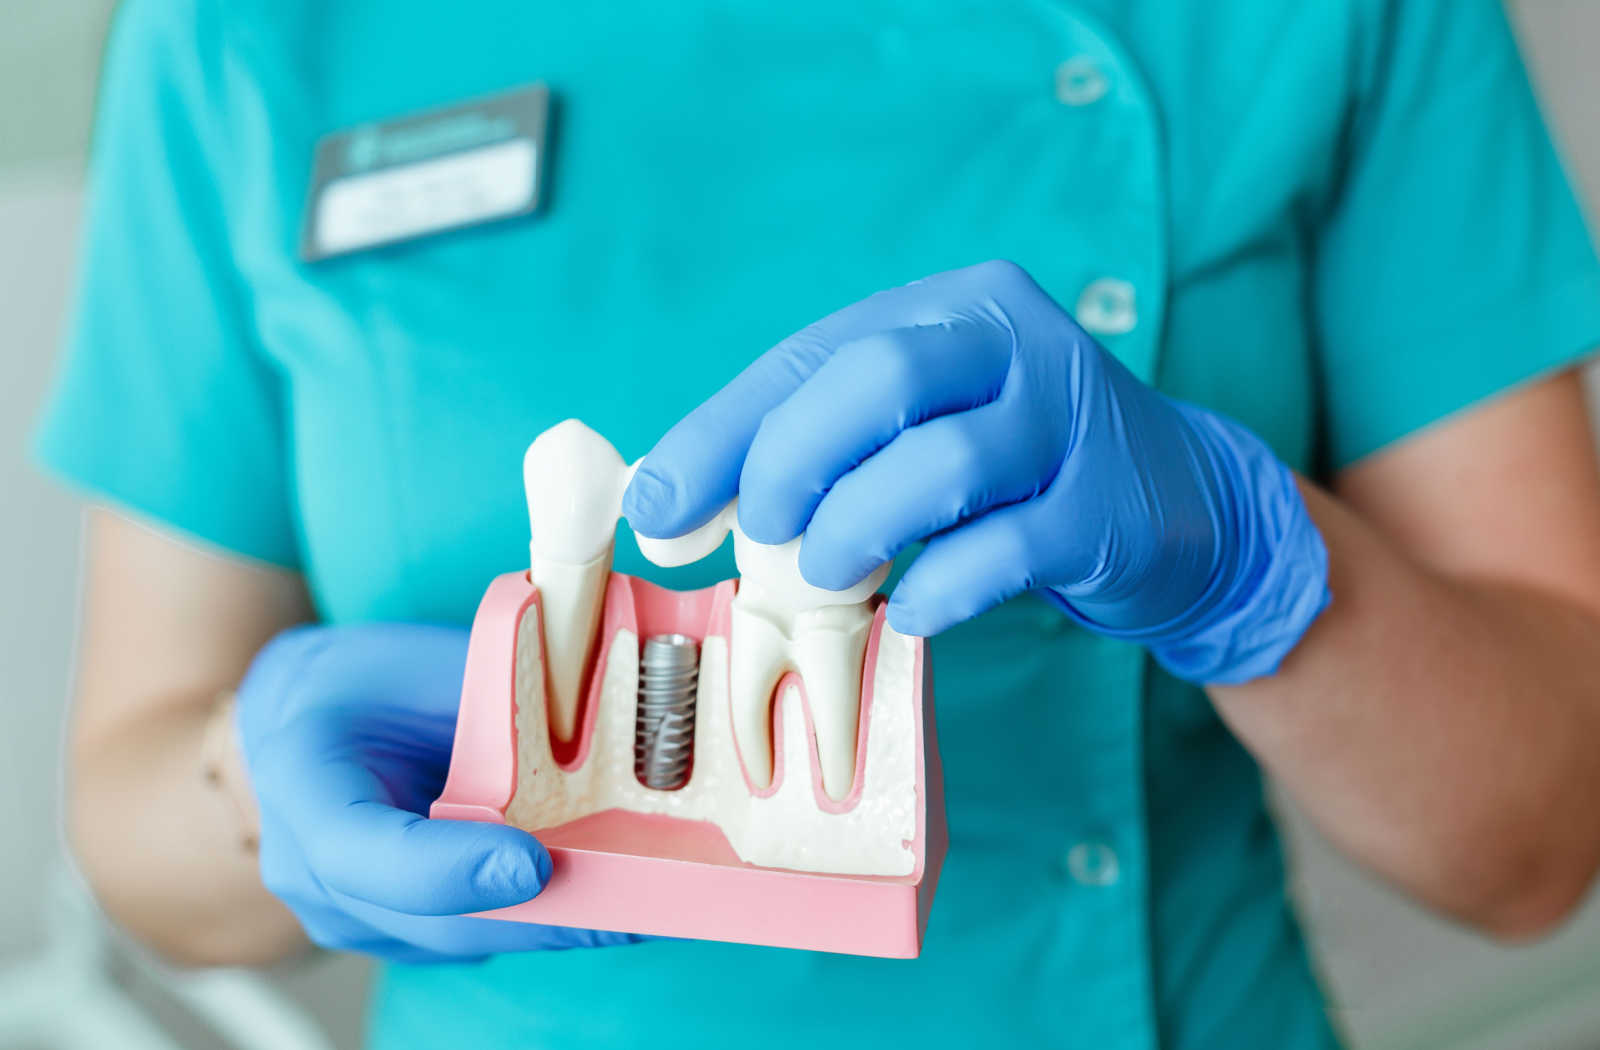 The close-up hands of a  dentist is holding a model of the tooth with a dental implant.